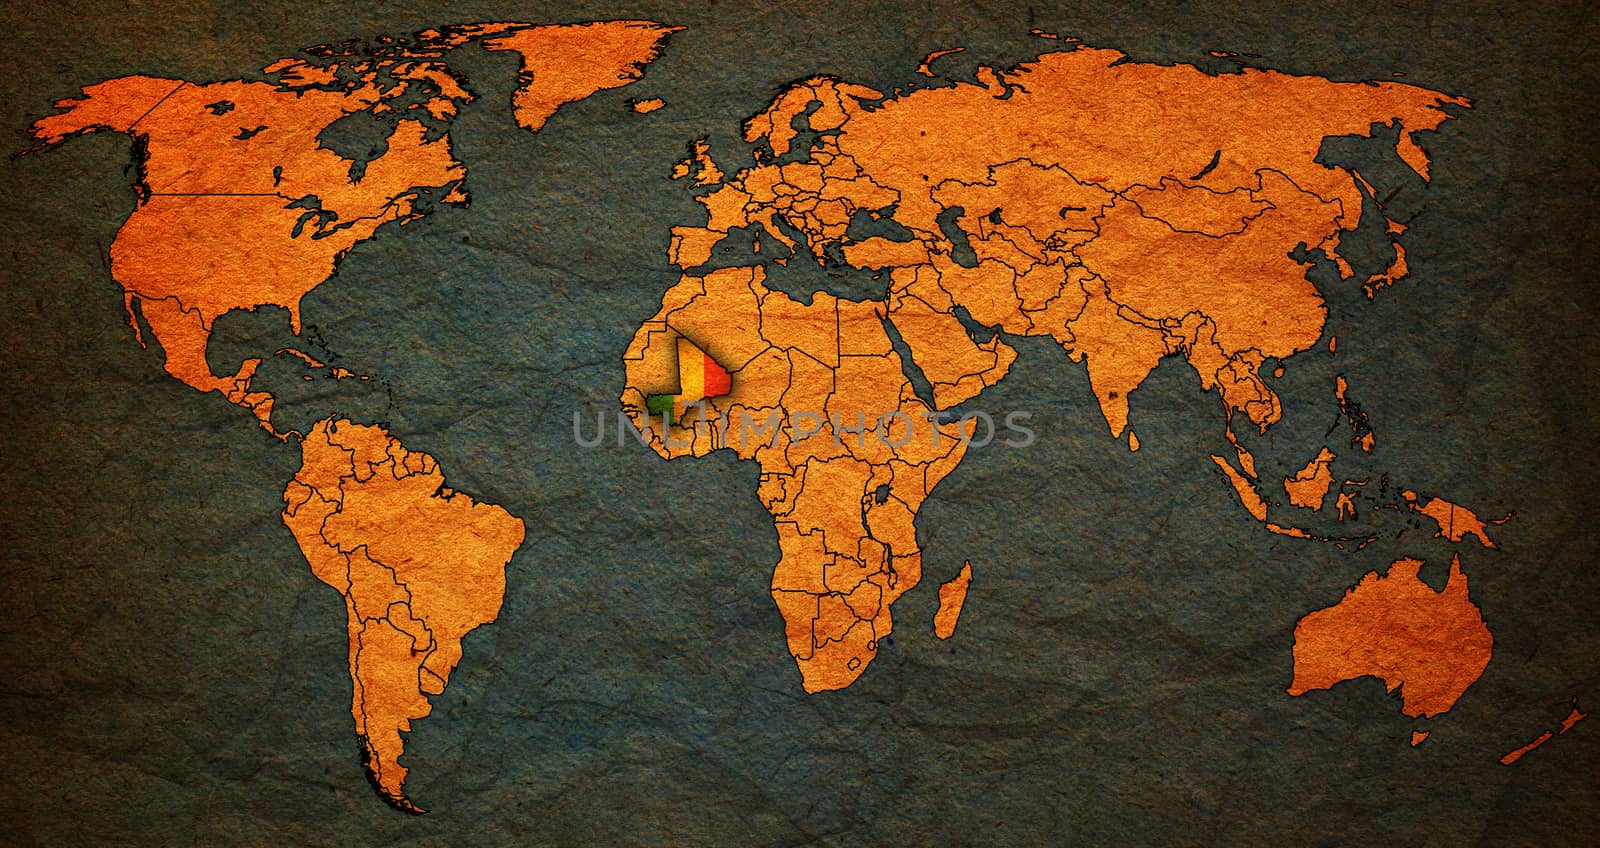 mali territory on world map by michal812